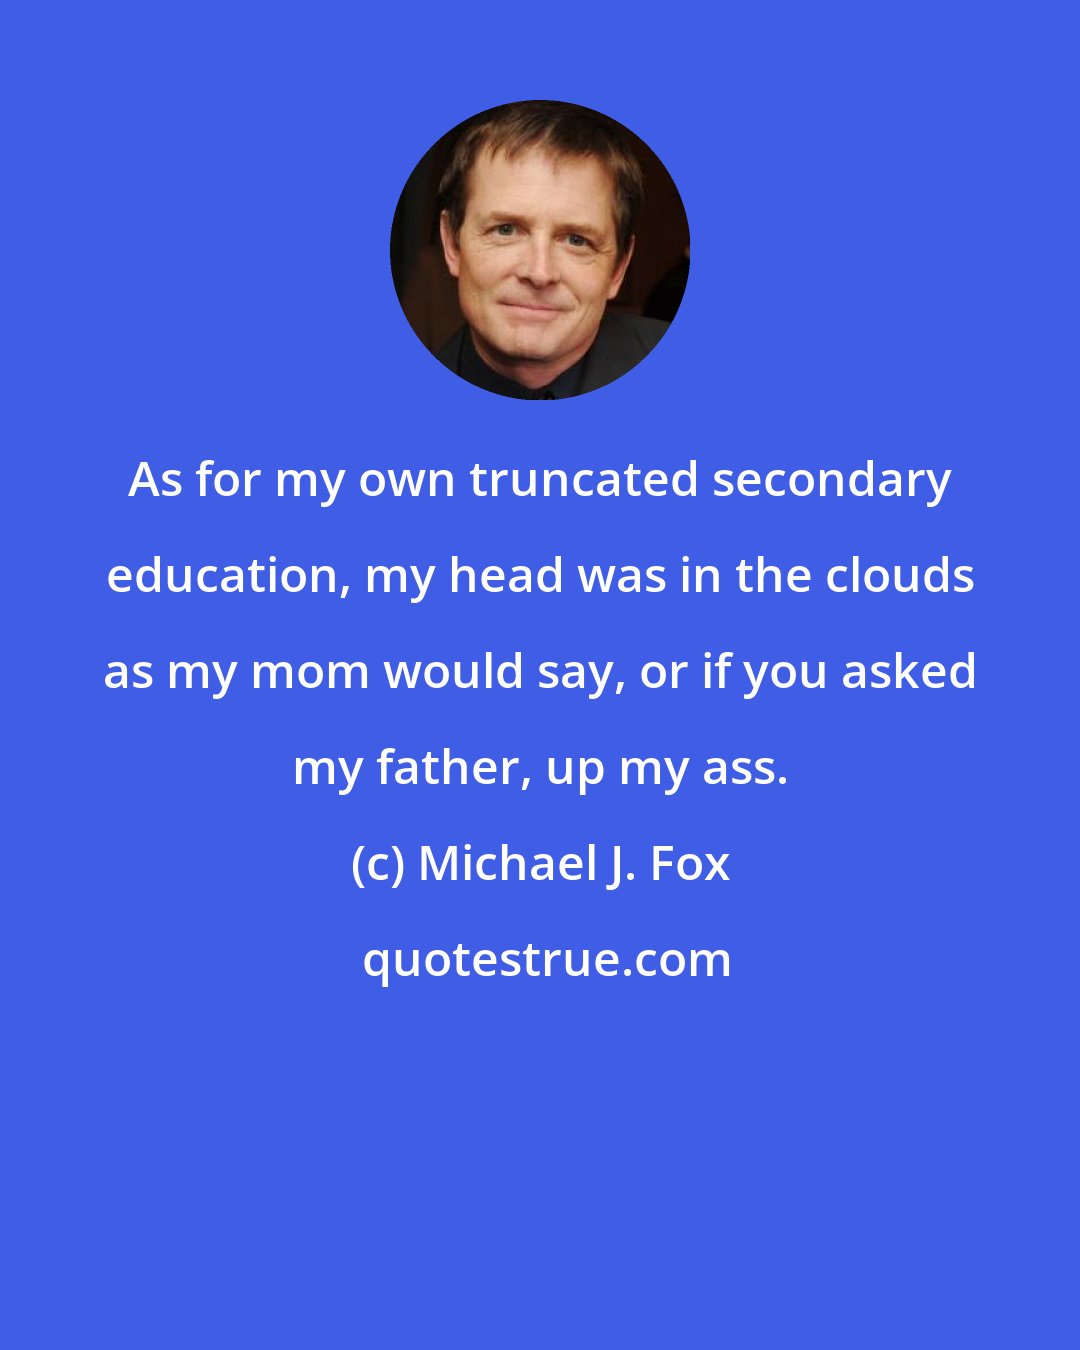 Michael J. Fox: As for my own truncated secondary education, my head was in the clouds as my mom would say, or if you asked my father, up my ass.